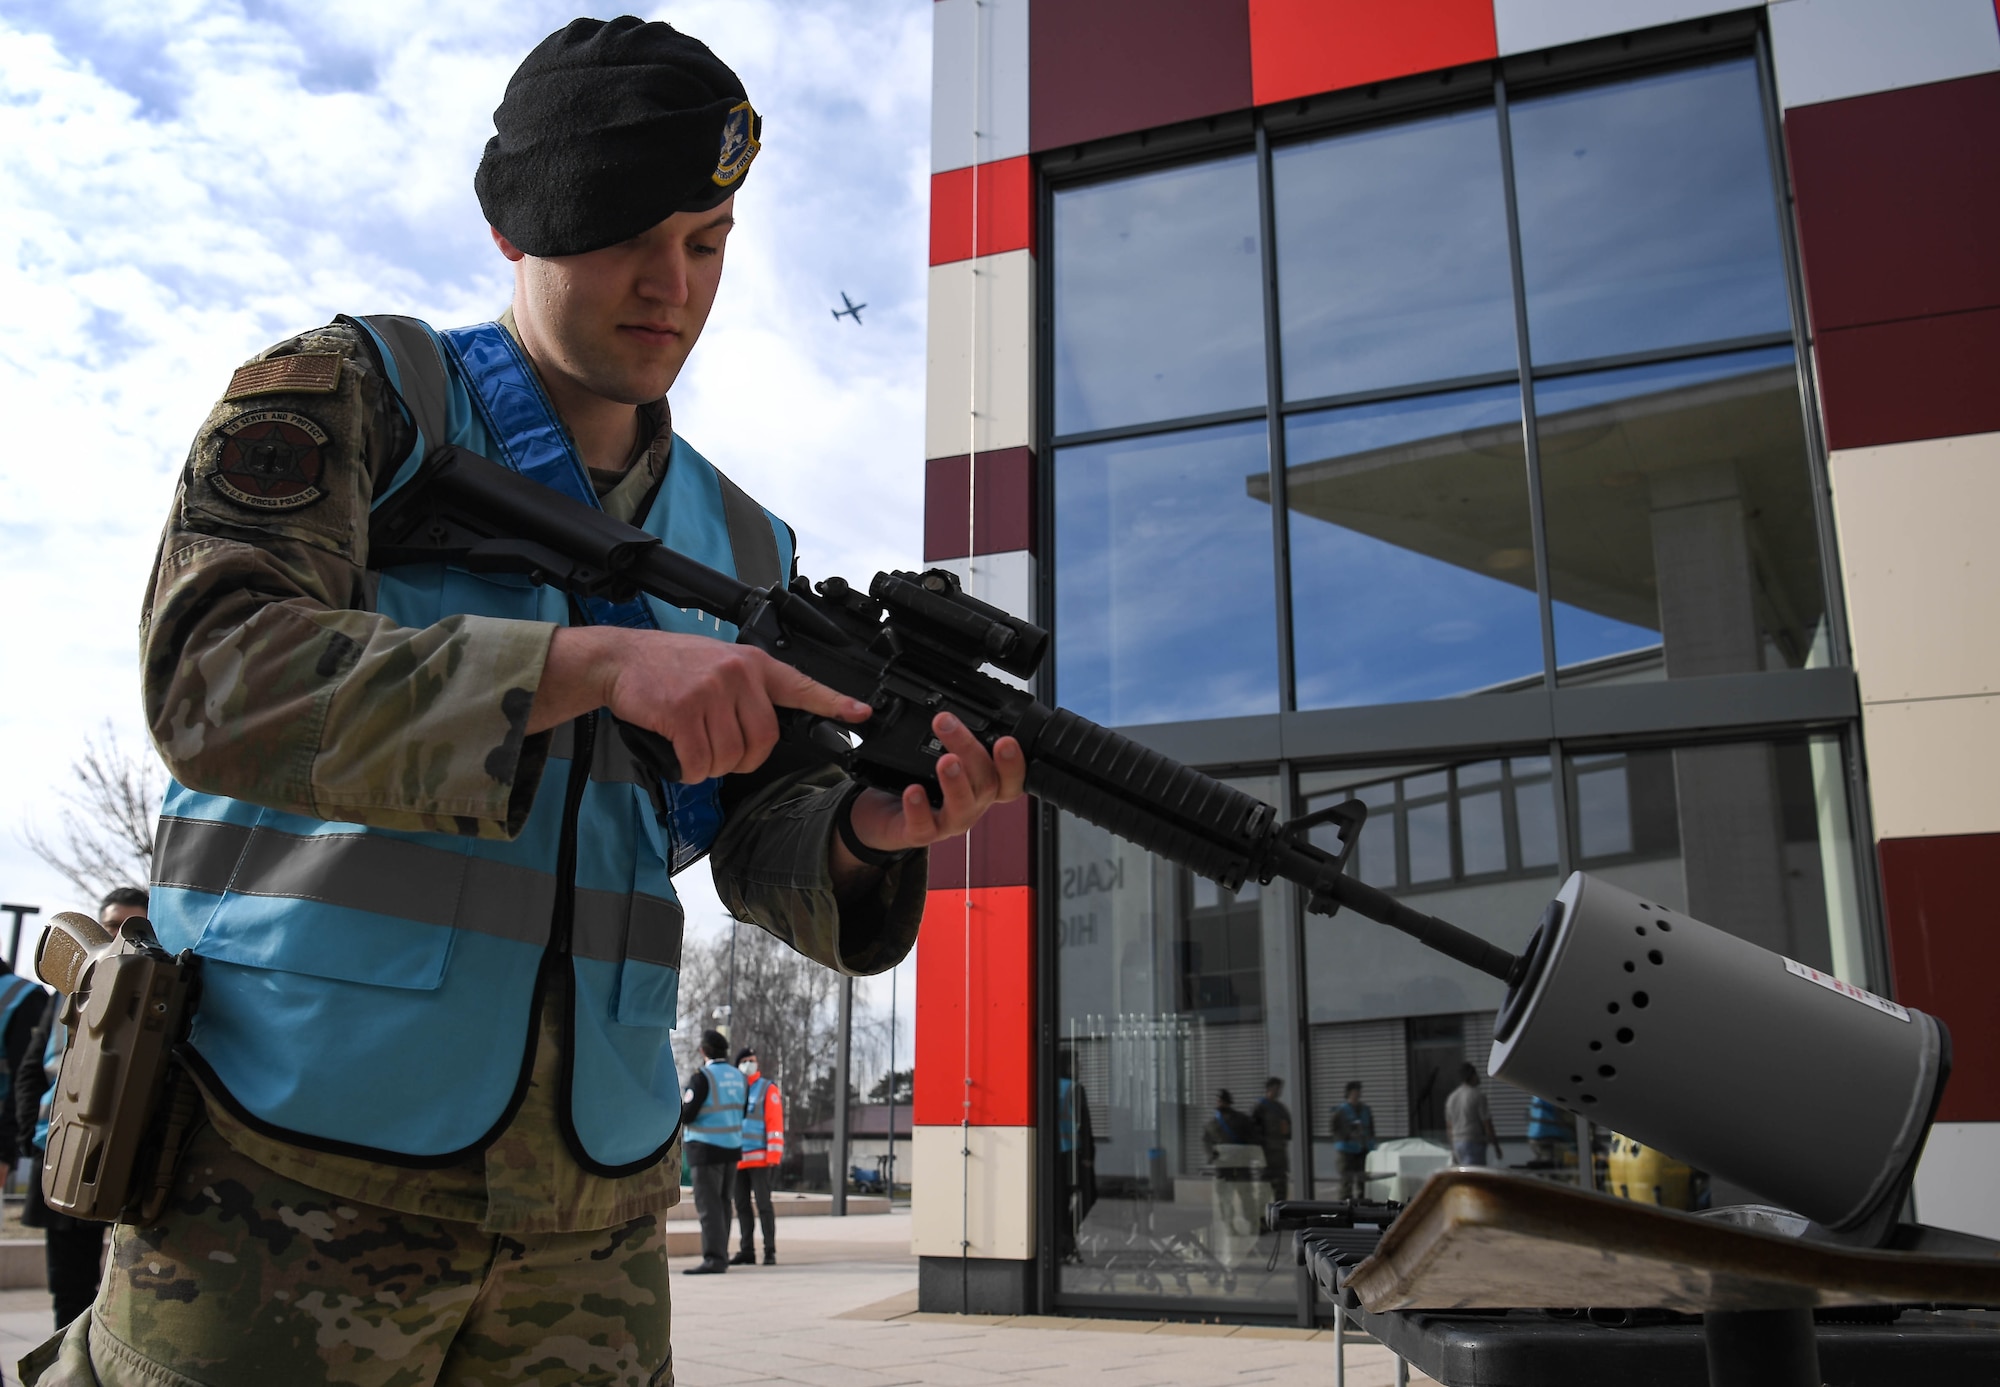 U.S. Air Force Nathan Craddock, 569th United States Forces Police Squadron standardization and evaluations, clears out the magazine well of a M4 Carbine during exercise Operation Varsity 22-1 which simulated an active shooter threat at Vogelweh Air Base, Germany, March 1, 2022. To ensure the safety of all participants in this exercise, no live-rounds were used. (U.S. Air Force photo by Airman 1st Class Jared Lovett)